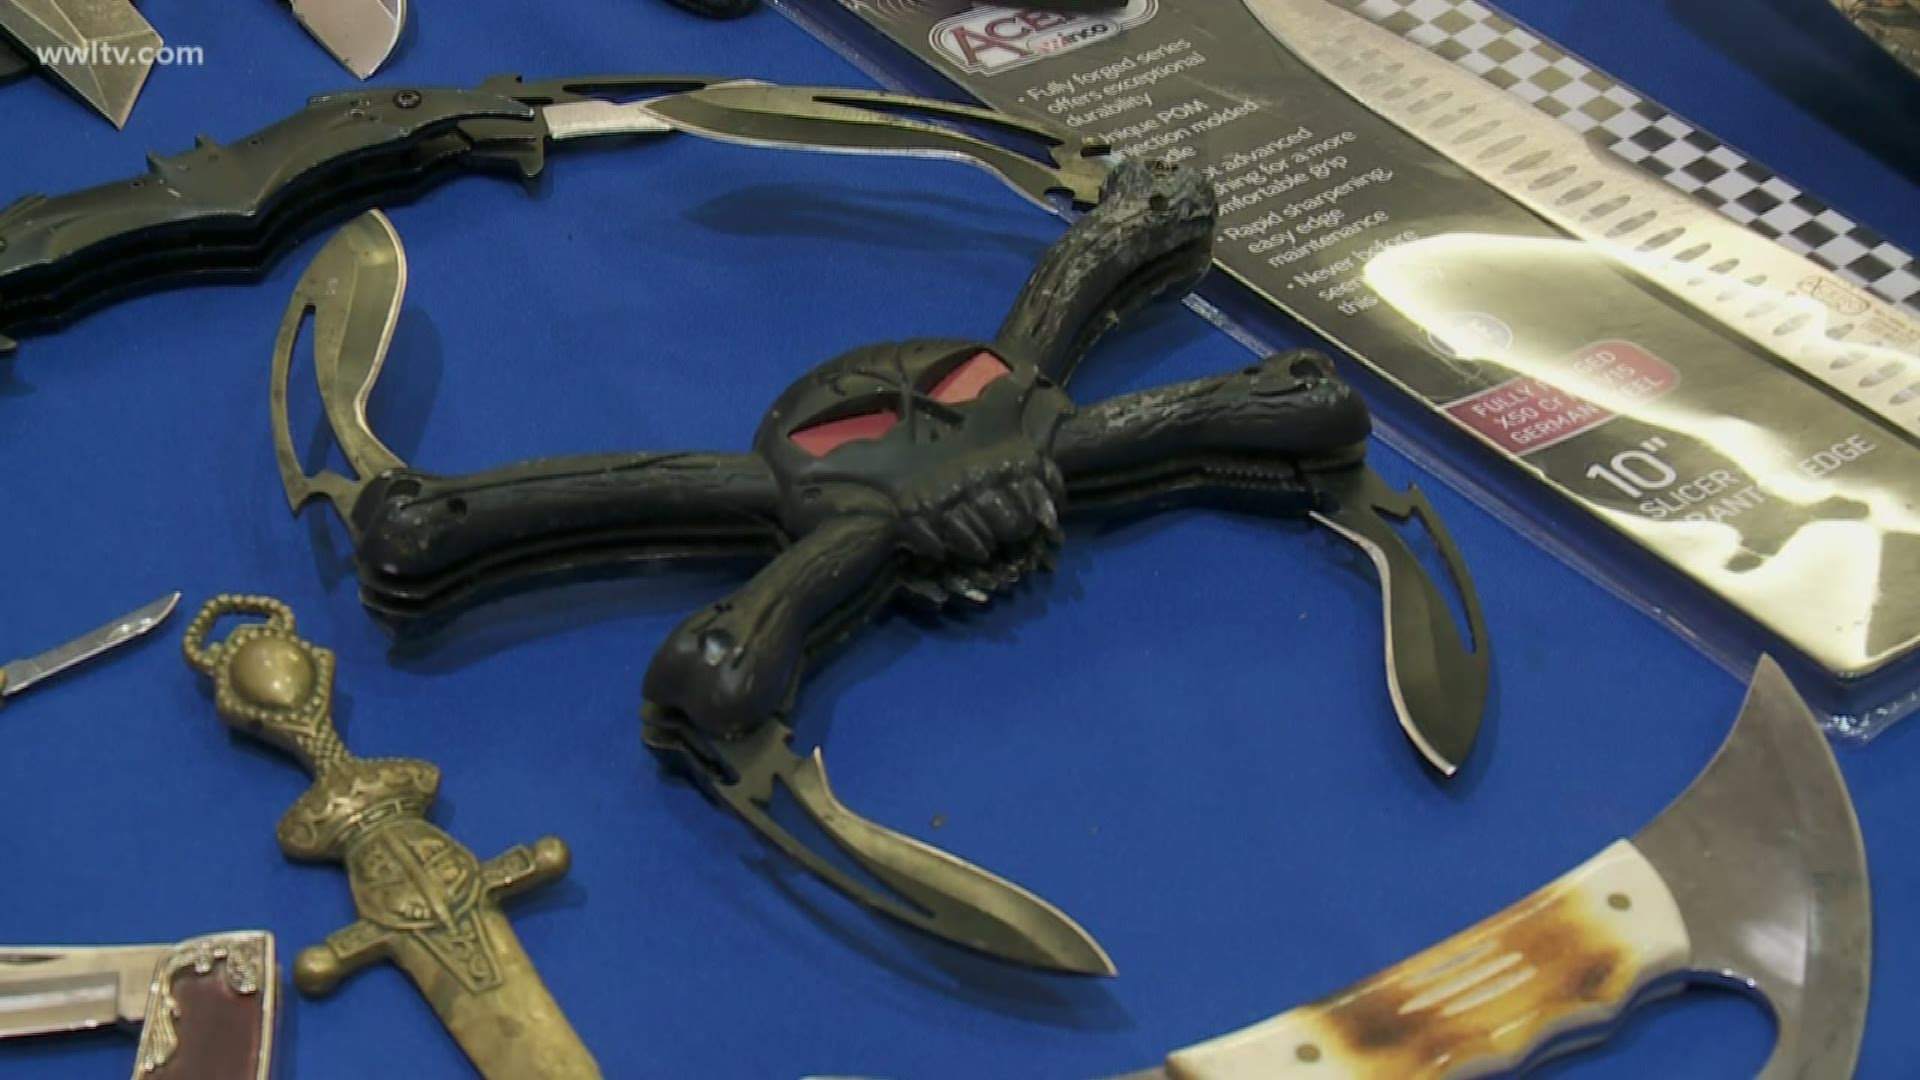 The TSA says 59 guns were stopped by officers at Louis Armstrong New Orleans International Airport last year.